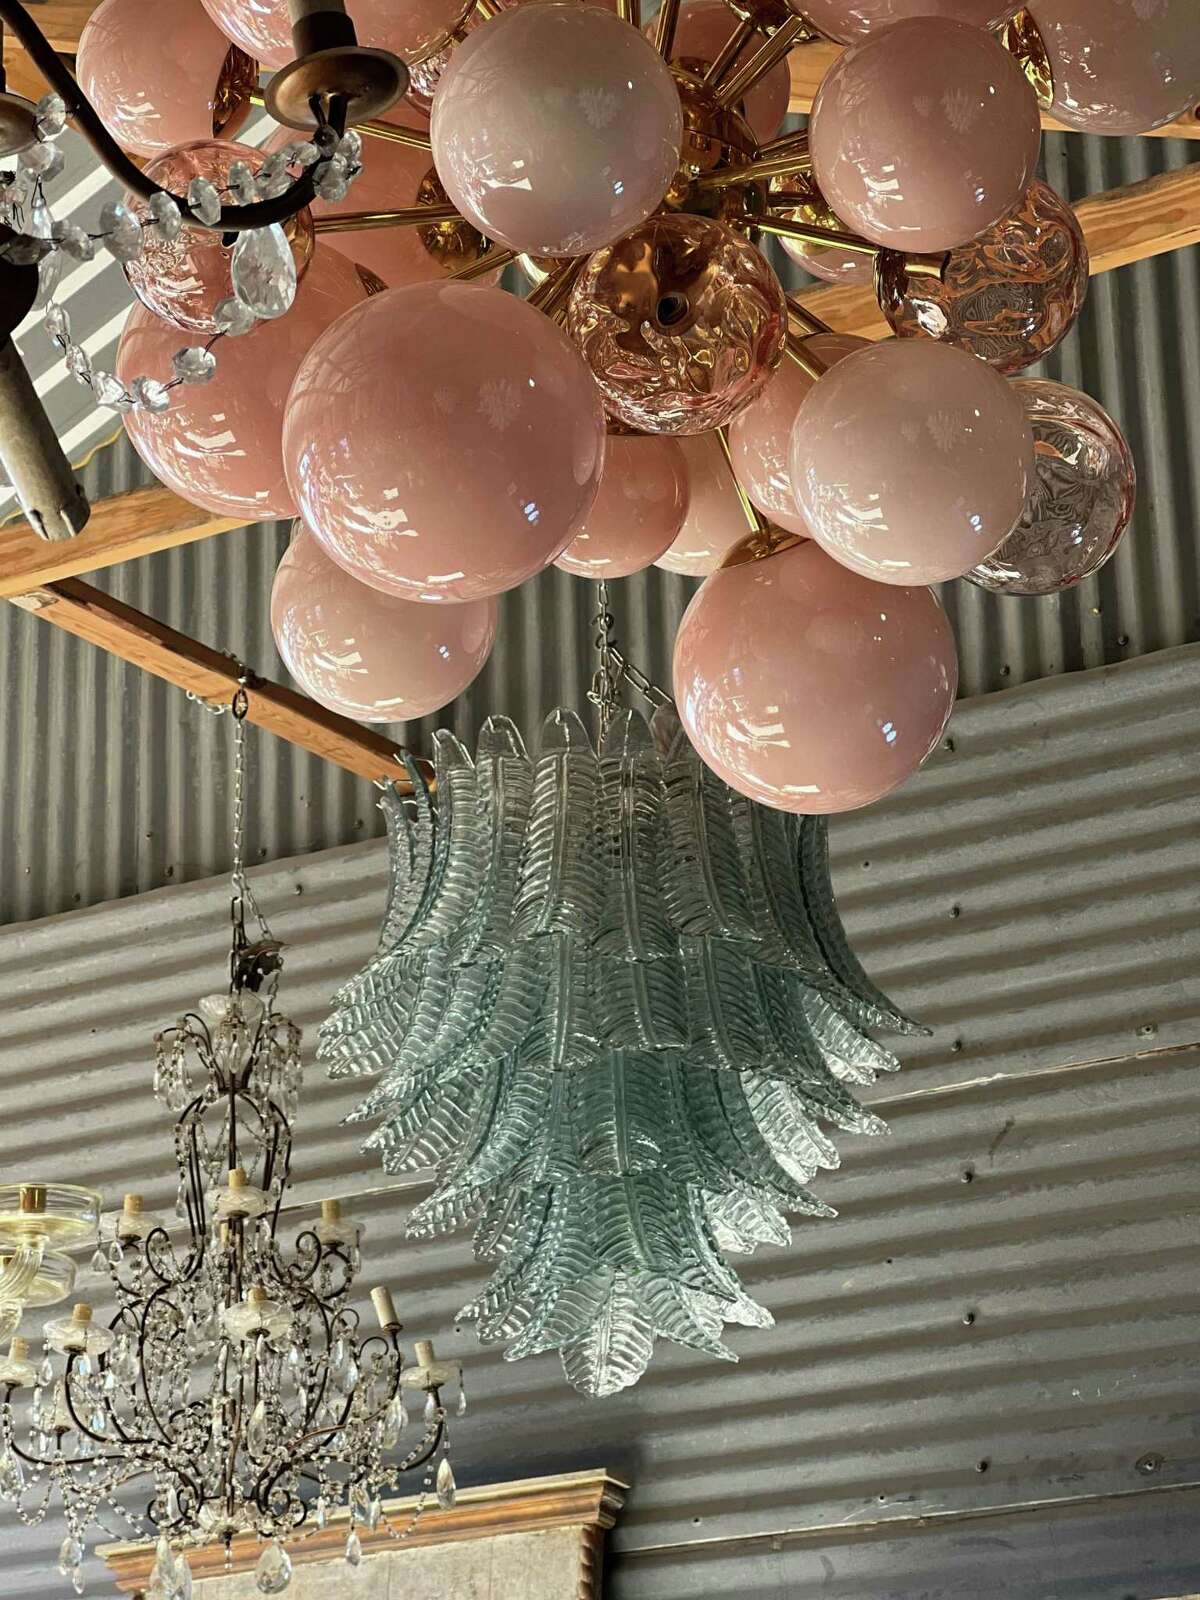 Janet Wiebe of Sourced by Janet Wiebe will have handmade Murano glass chandeliers, sconces and table lamps in her booth at Blue Hills in the 2023 winter antique show in Round Top.